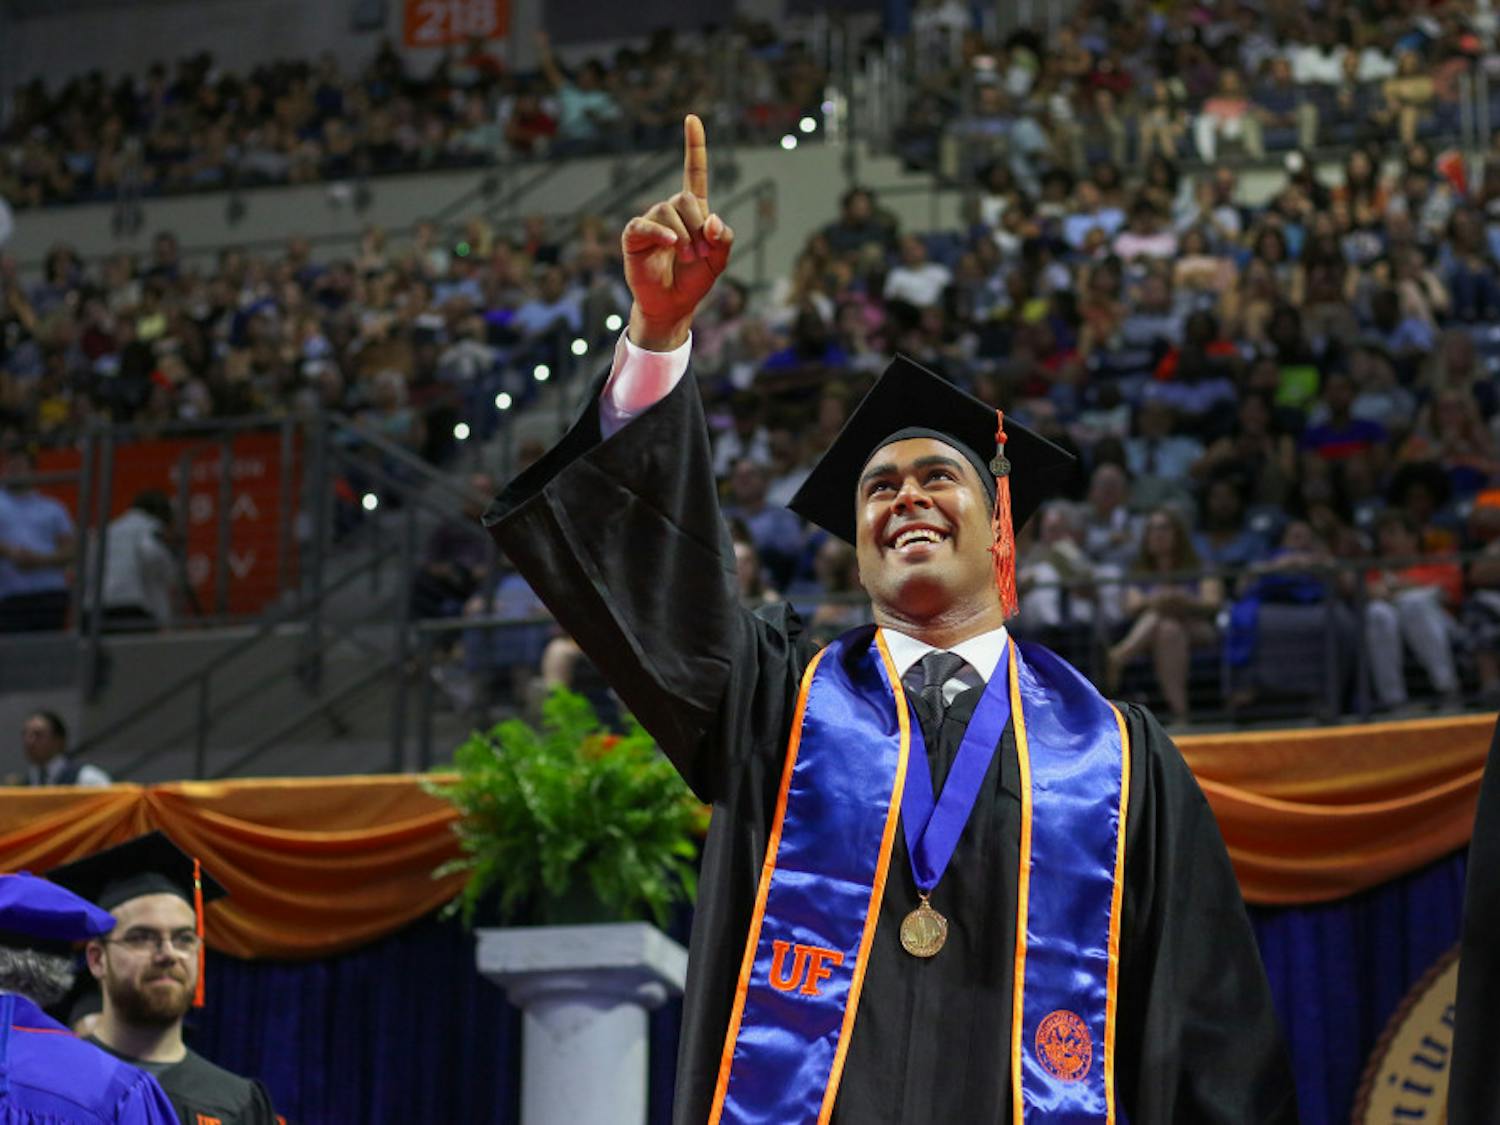 Ali Shahin, a 23-year-old student graduating with a bachelor’s degree in mechanical engineering, walks across the stage Saturday in the O’Connell Center during the Summer 2019 graduation ceremony at the University of Florida. Shahin has accepted a job to work with the Florida Department of Transportation, UF and Gamma Scientific to be lead research engineer for the development of equipment to measure the reflectivity of pavement markings.